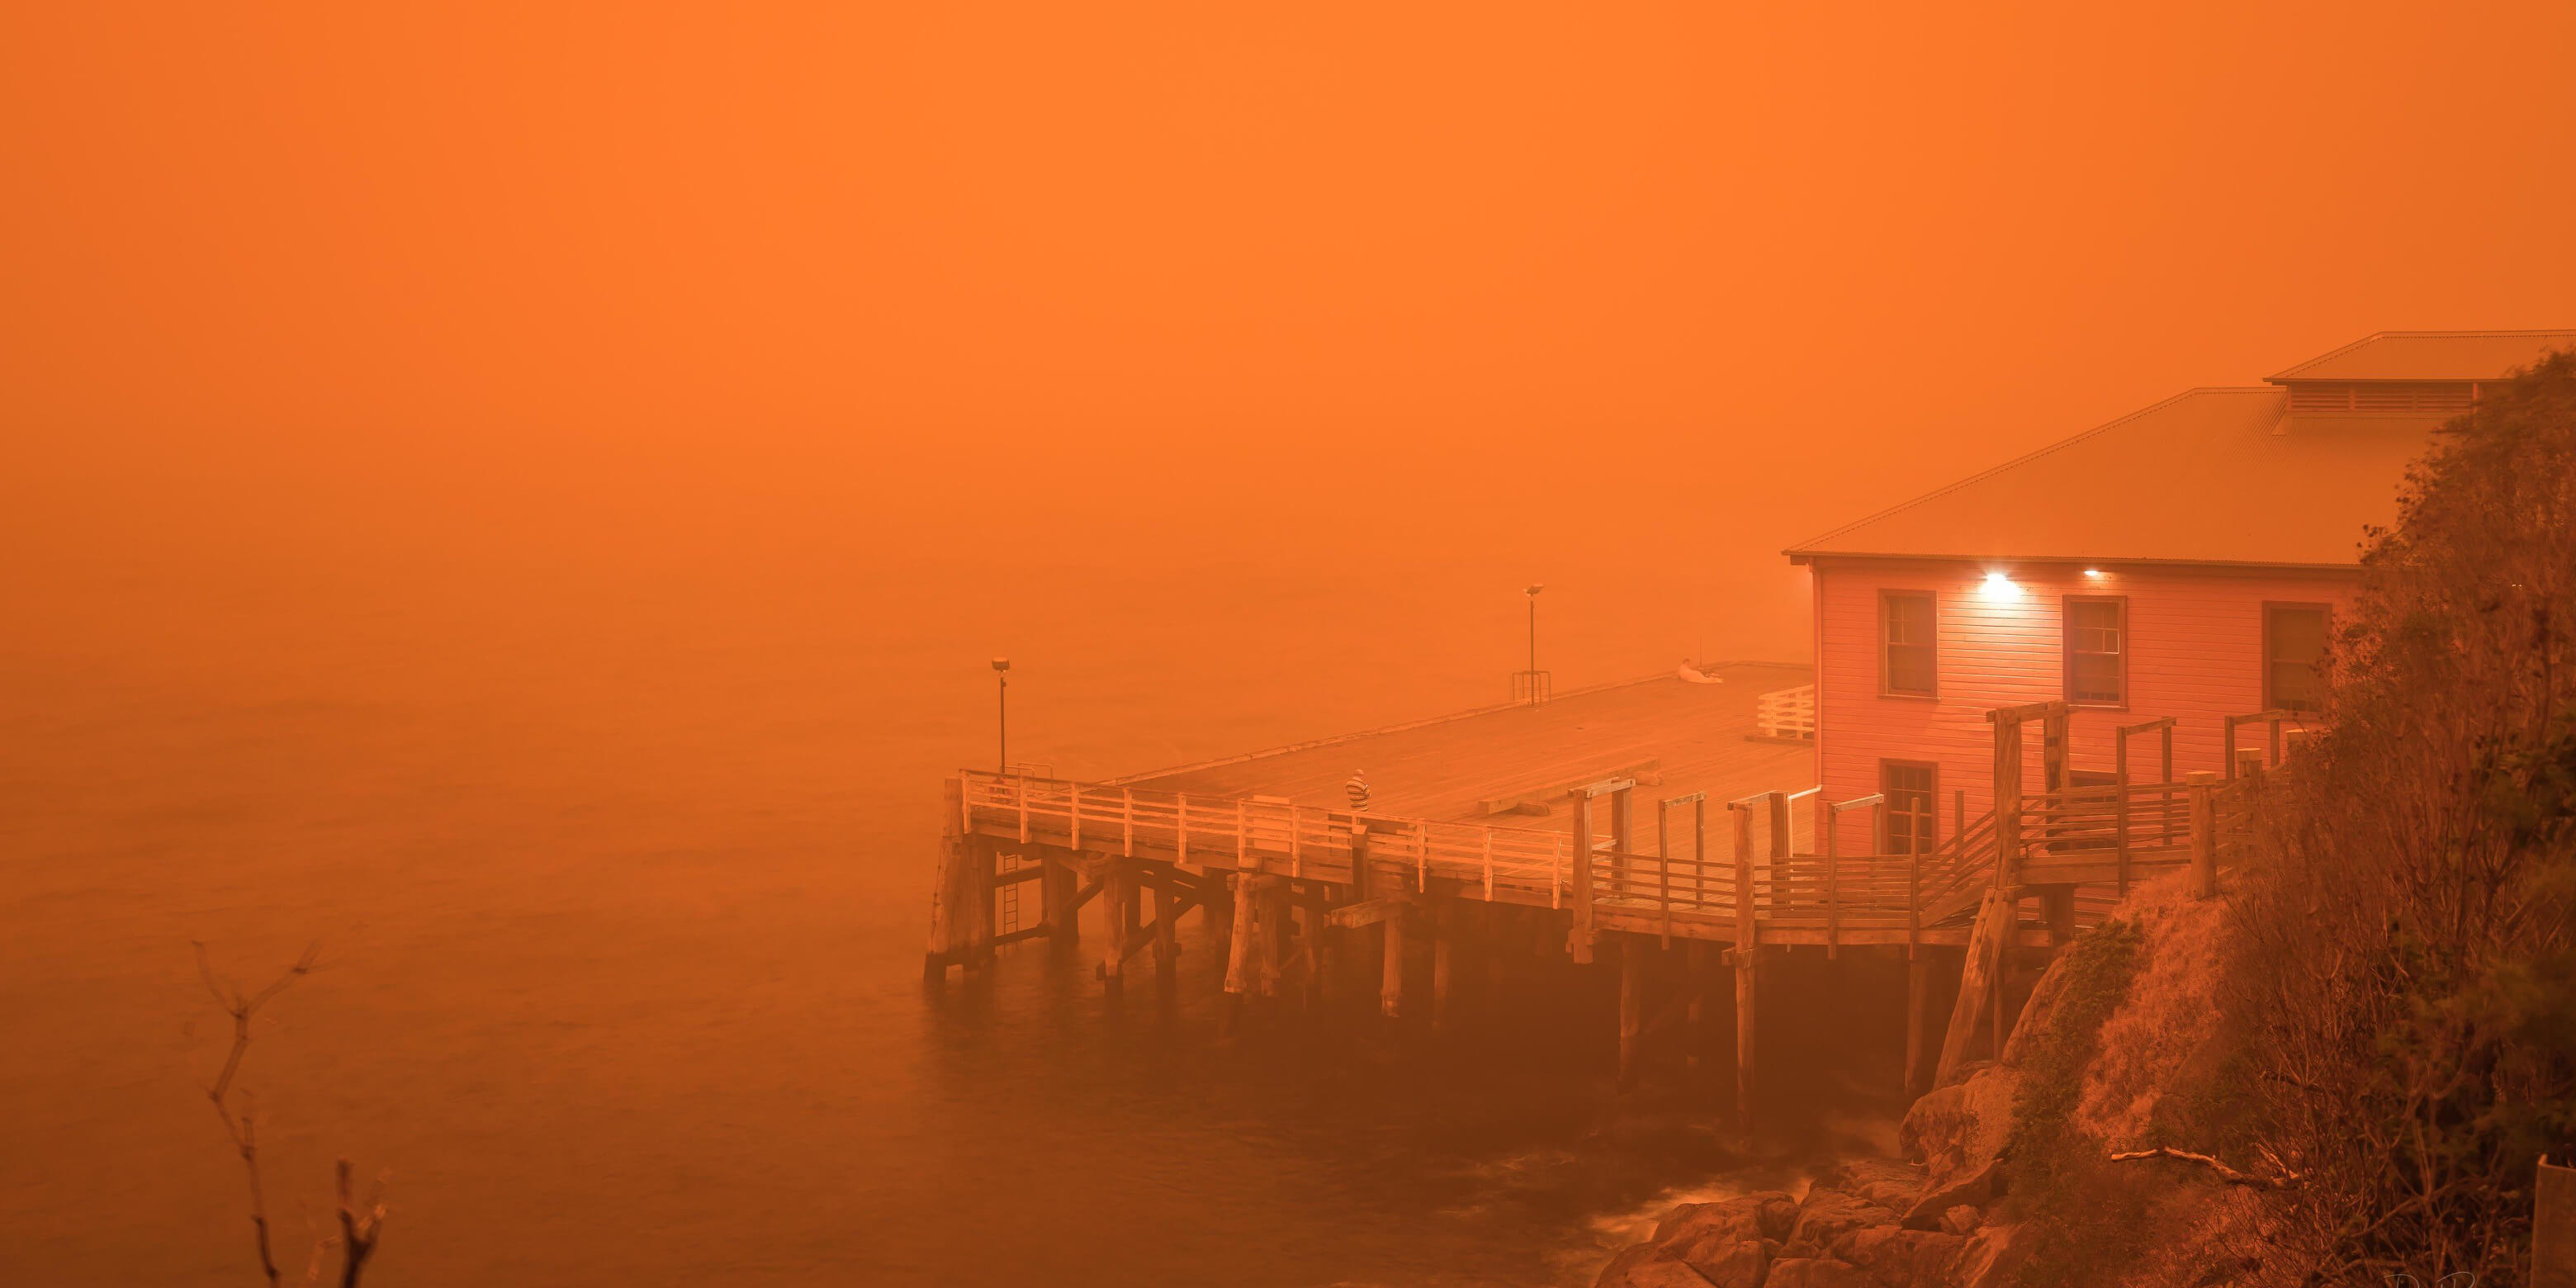 A wharf and building next to the building. Everything in the image is glowing in bright orange due to bushfires near by 